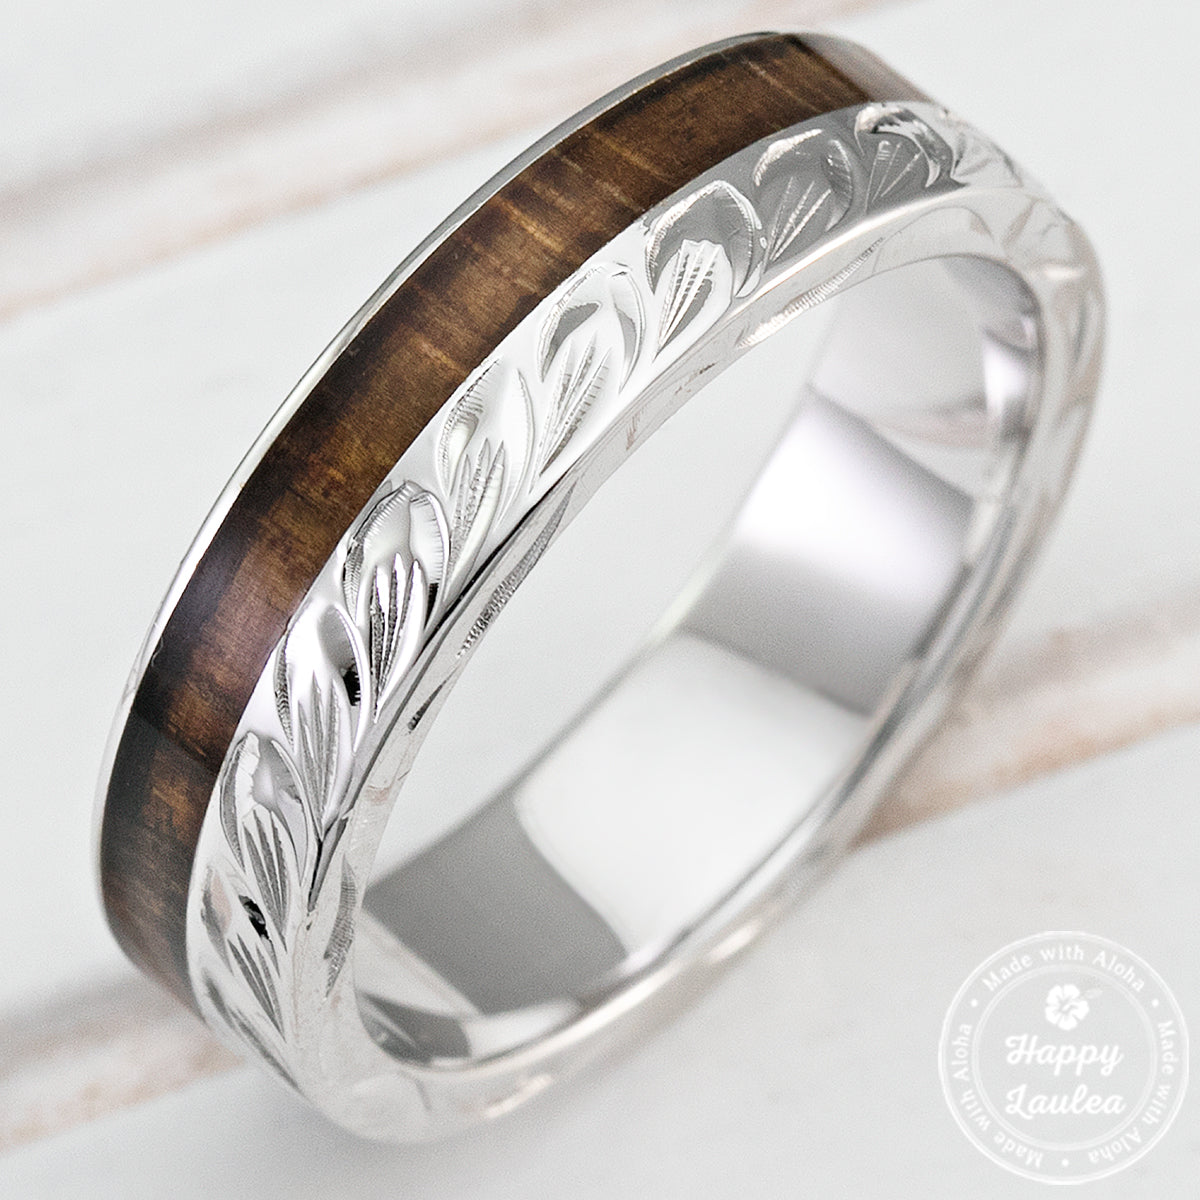 925 Sterling Silver Hand Engraved Maile Leaf Ring with Hawaiian Koa Wood Inlay - 6mm, Flat Shape, Standard Fitment